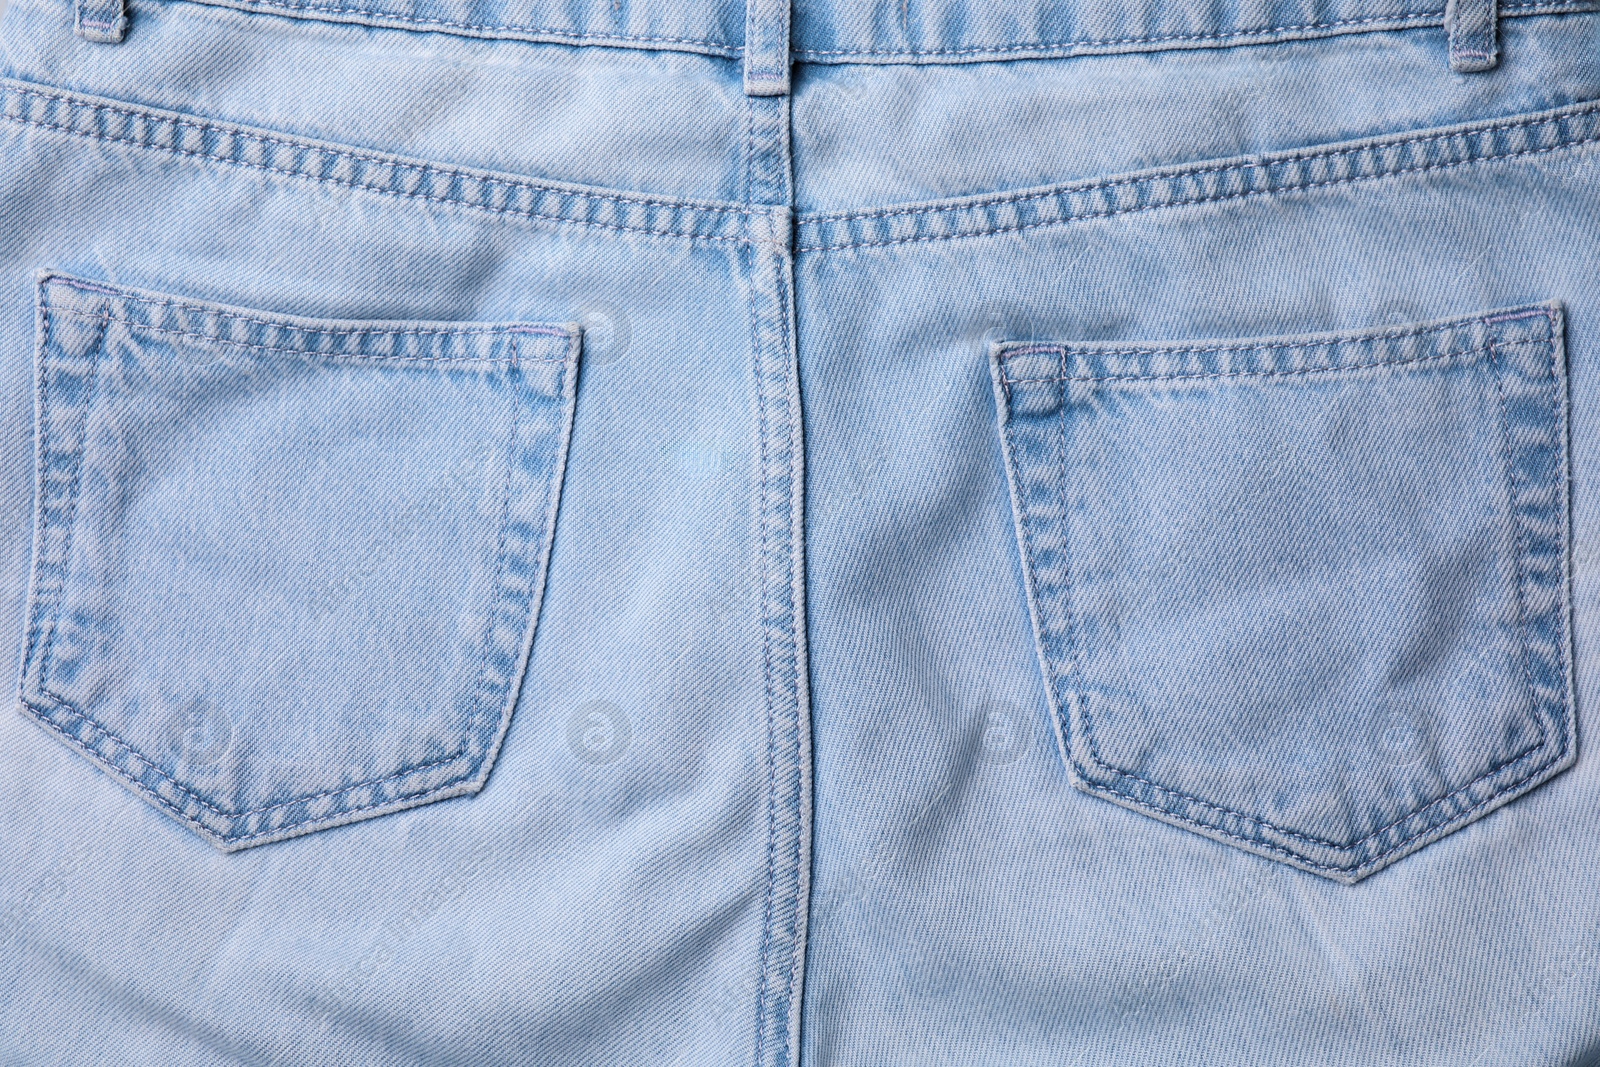 Photo of Jeans with pockets as background, top view